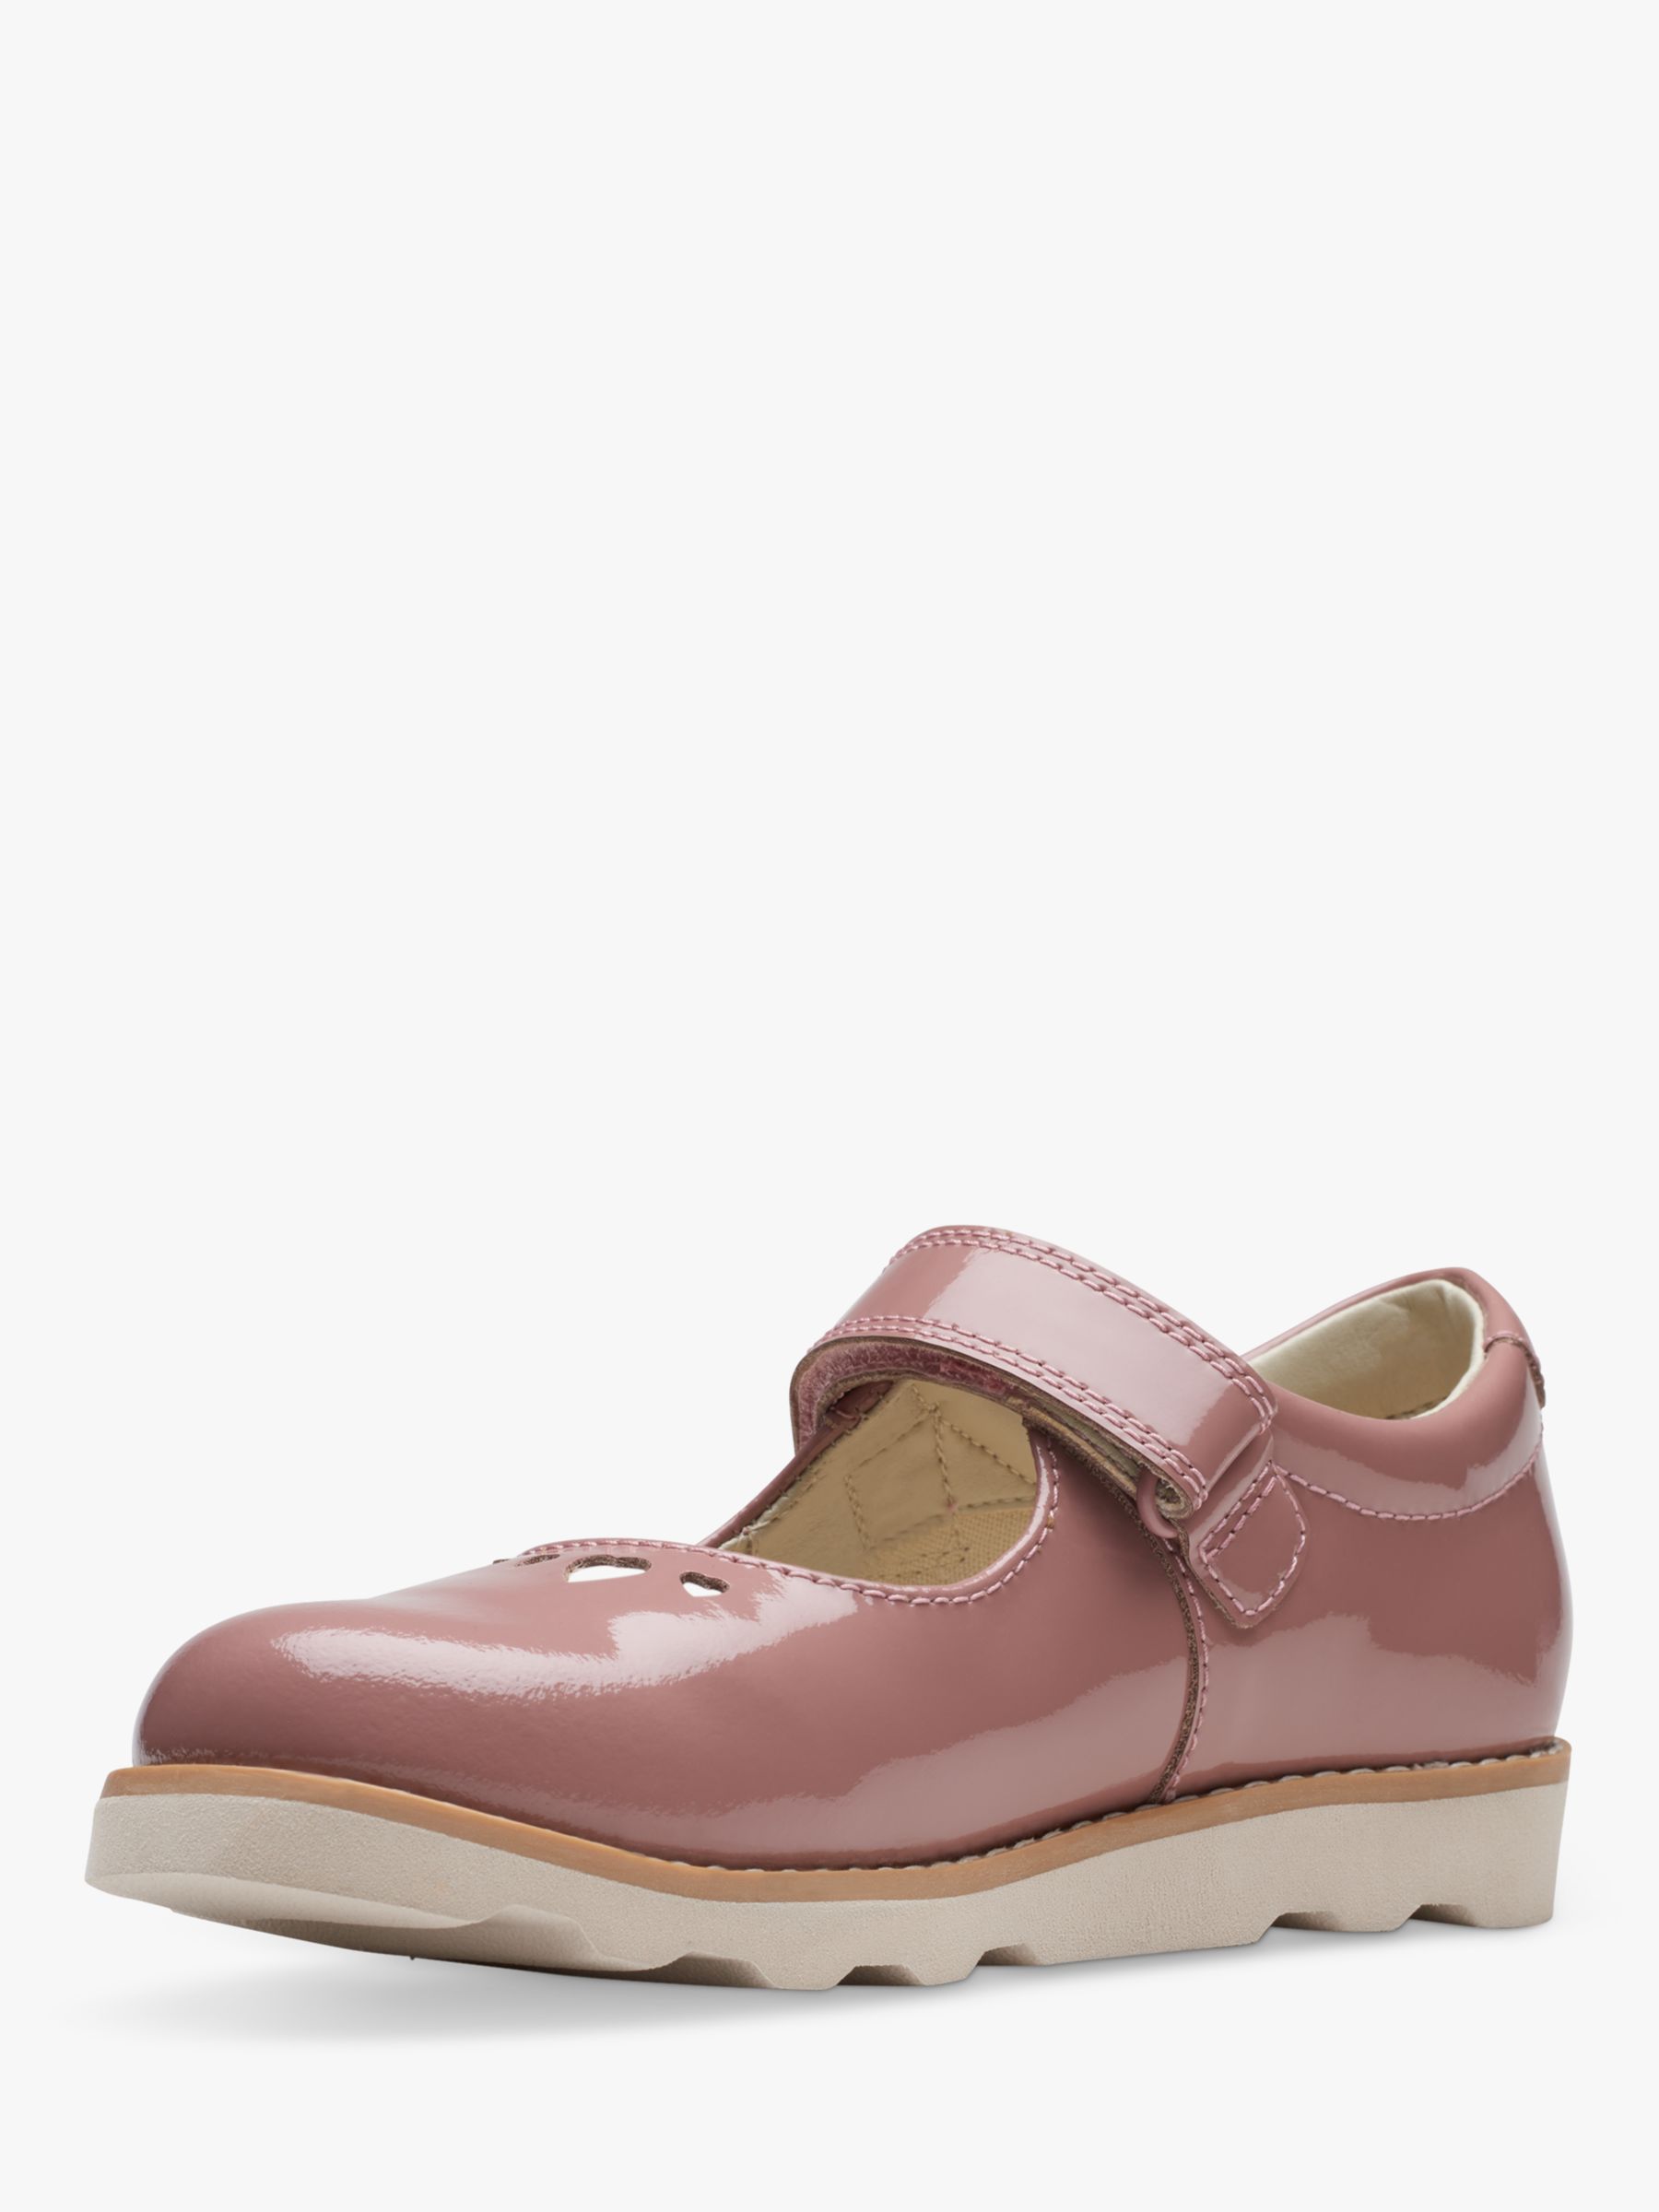 Clarks Kids' Crown Jane Leather Shoes, Dusty Pink, 4F Jnr